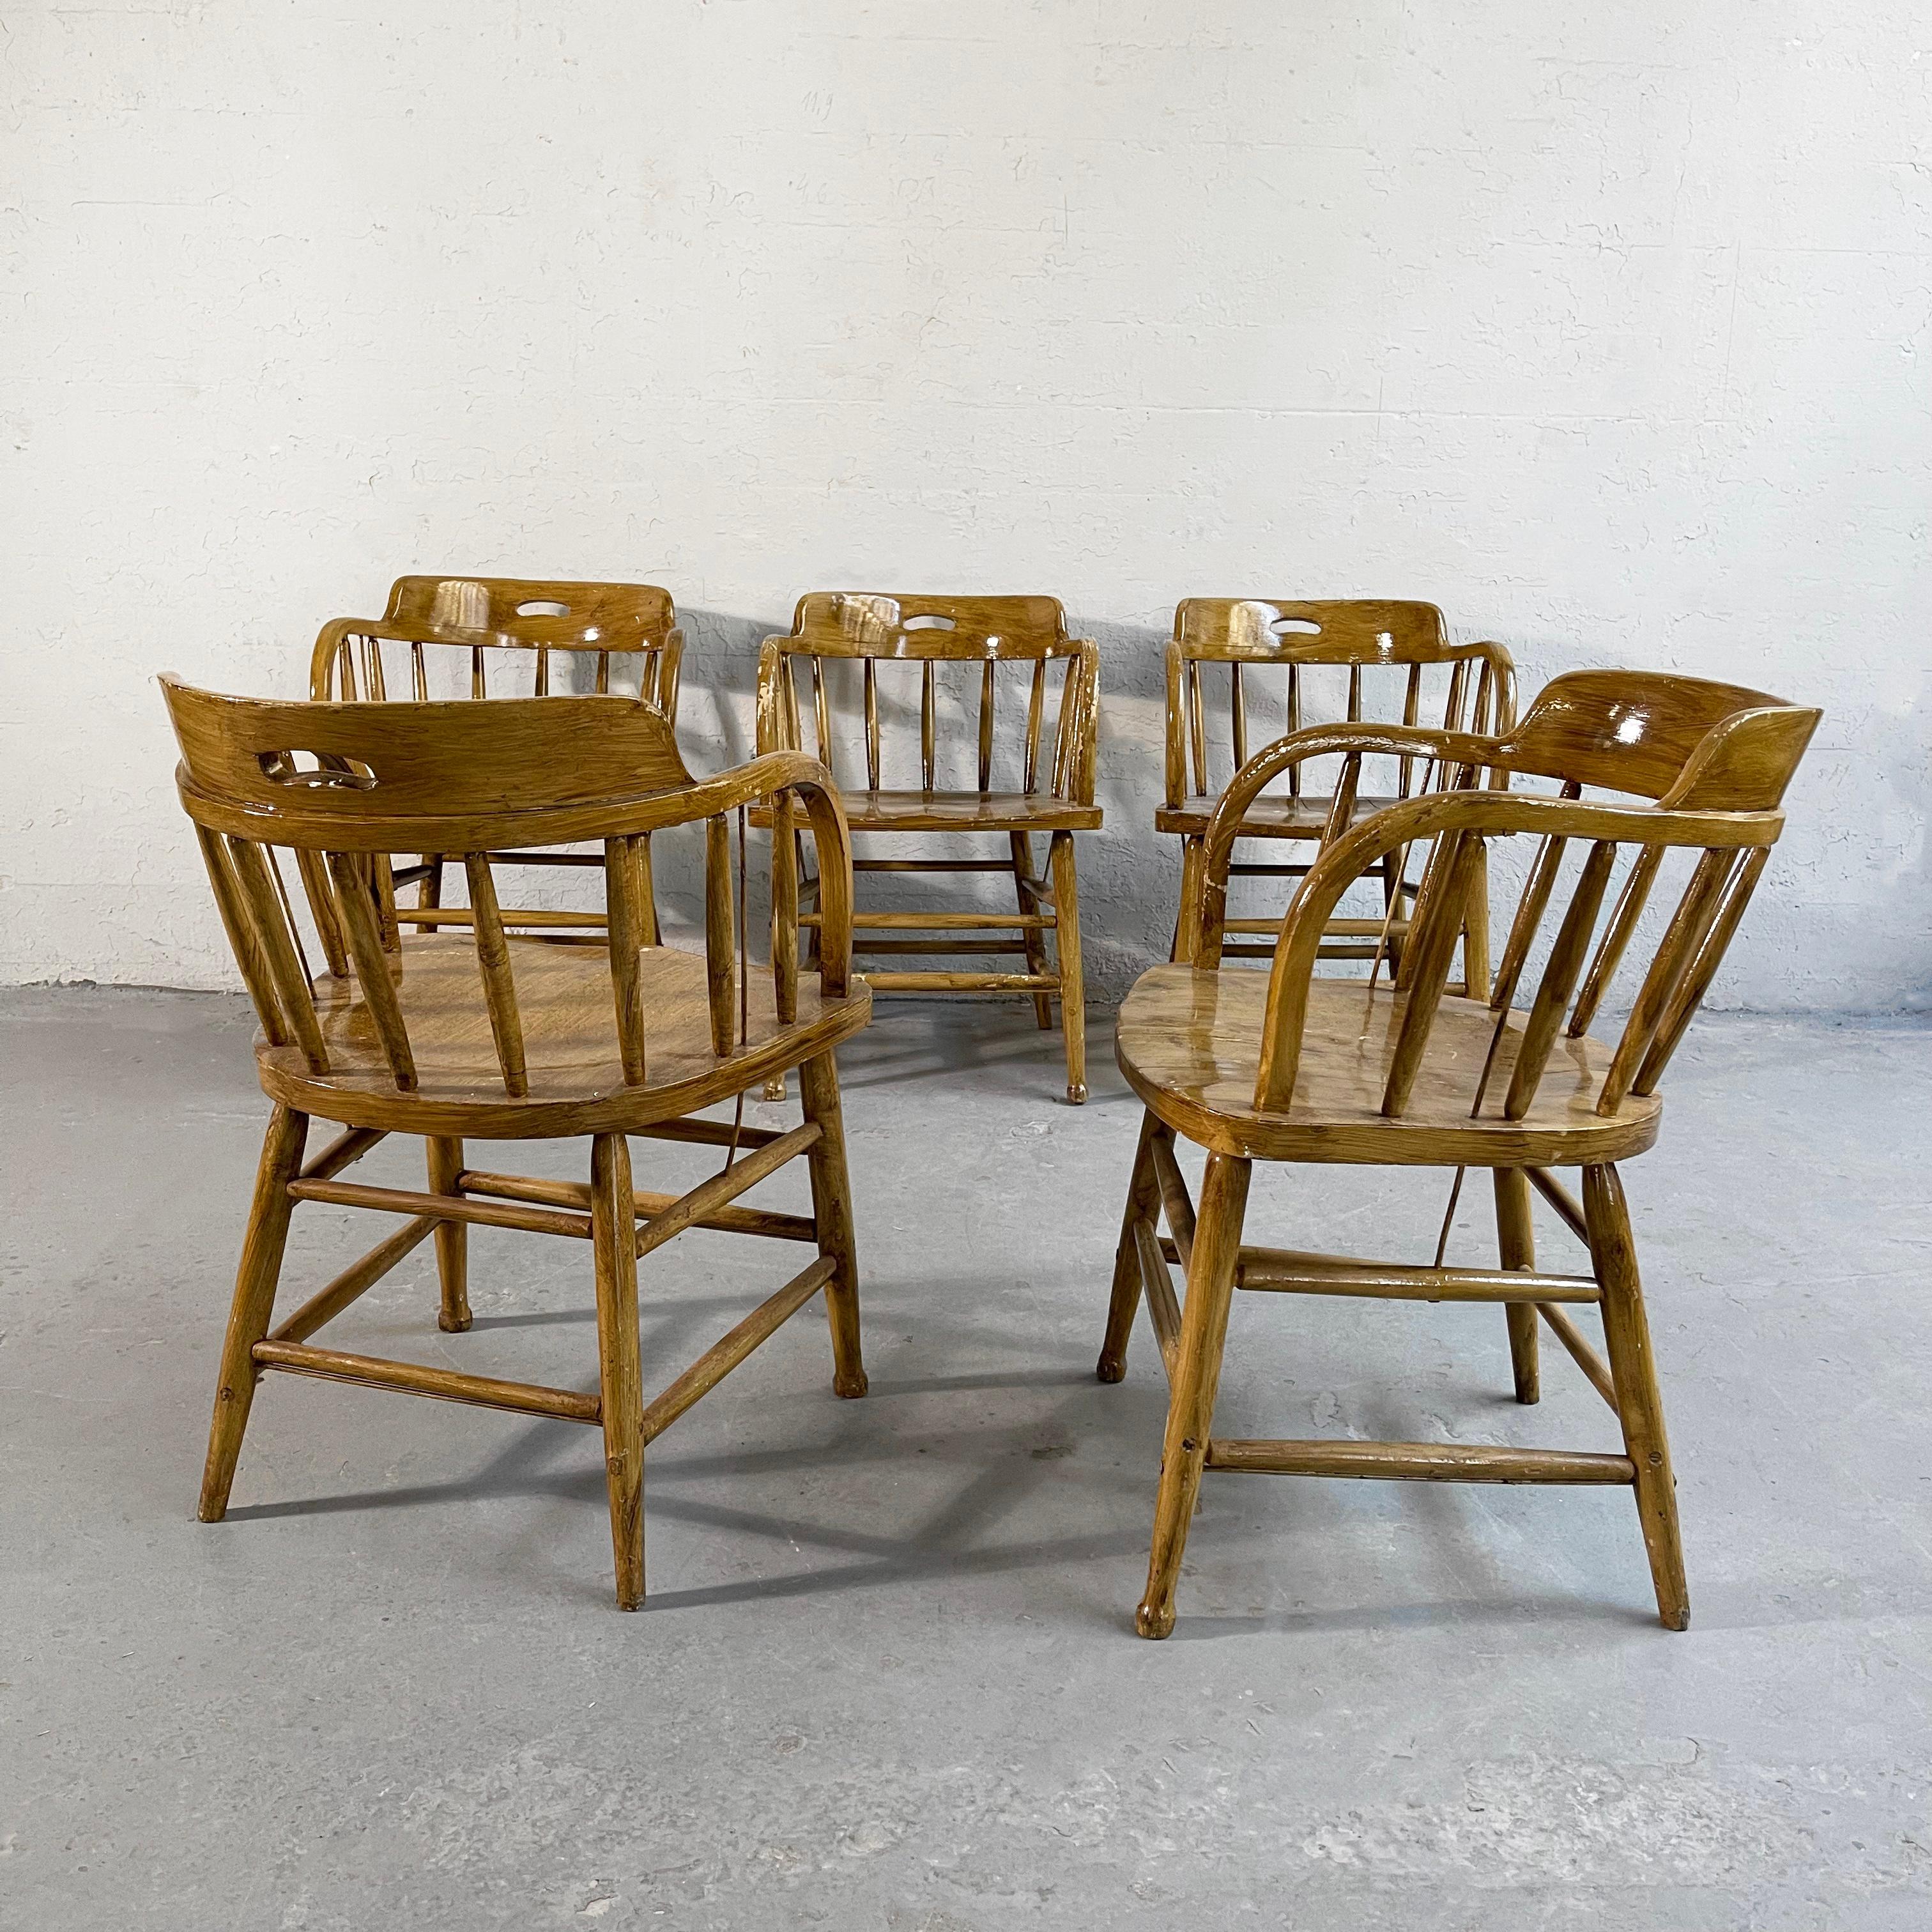 Early 20th Century, Rustic Oak Firehouse Dining Chairs For Sale 1